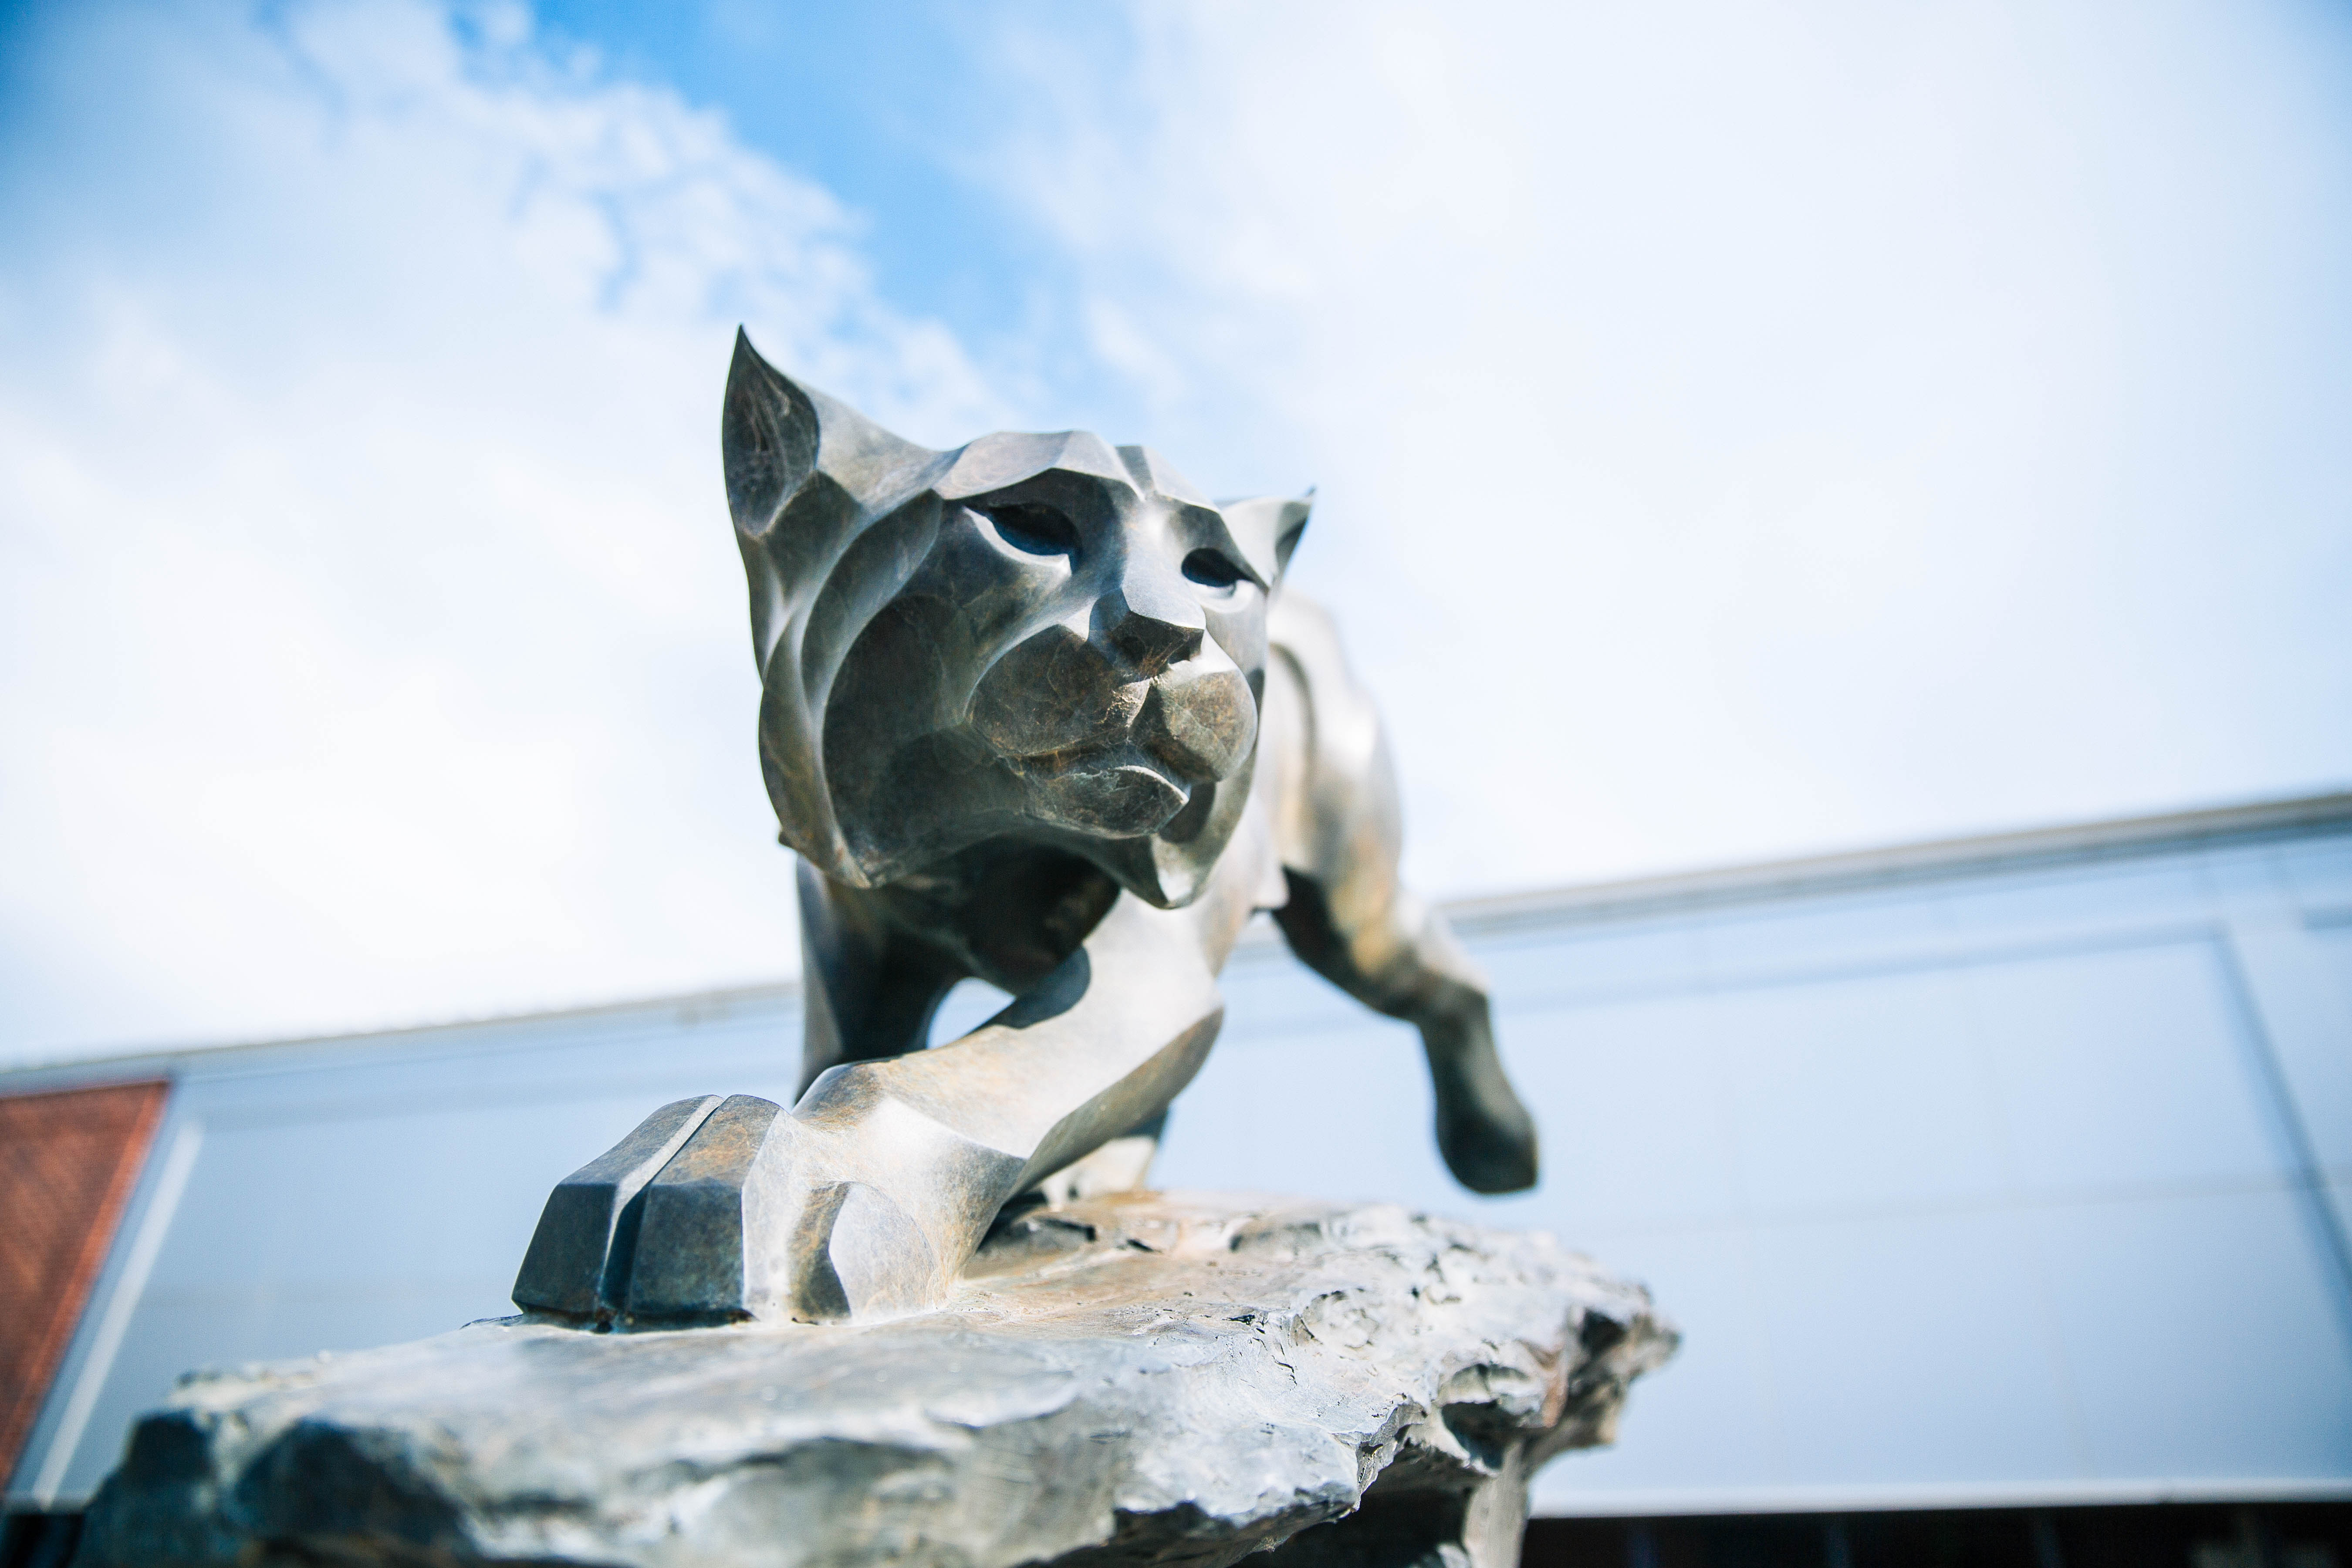 This is another of our bobcat statues, located near the Al Wheeler Activity Center.